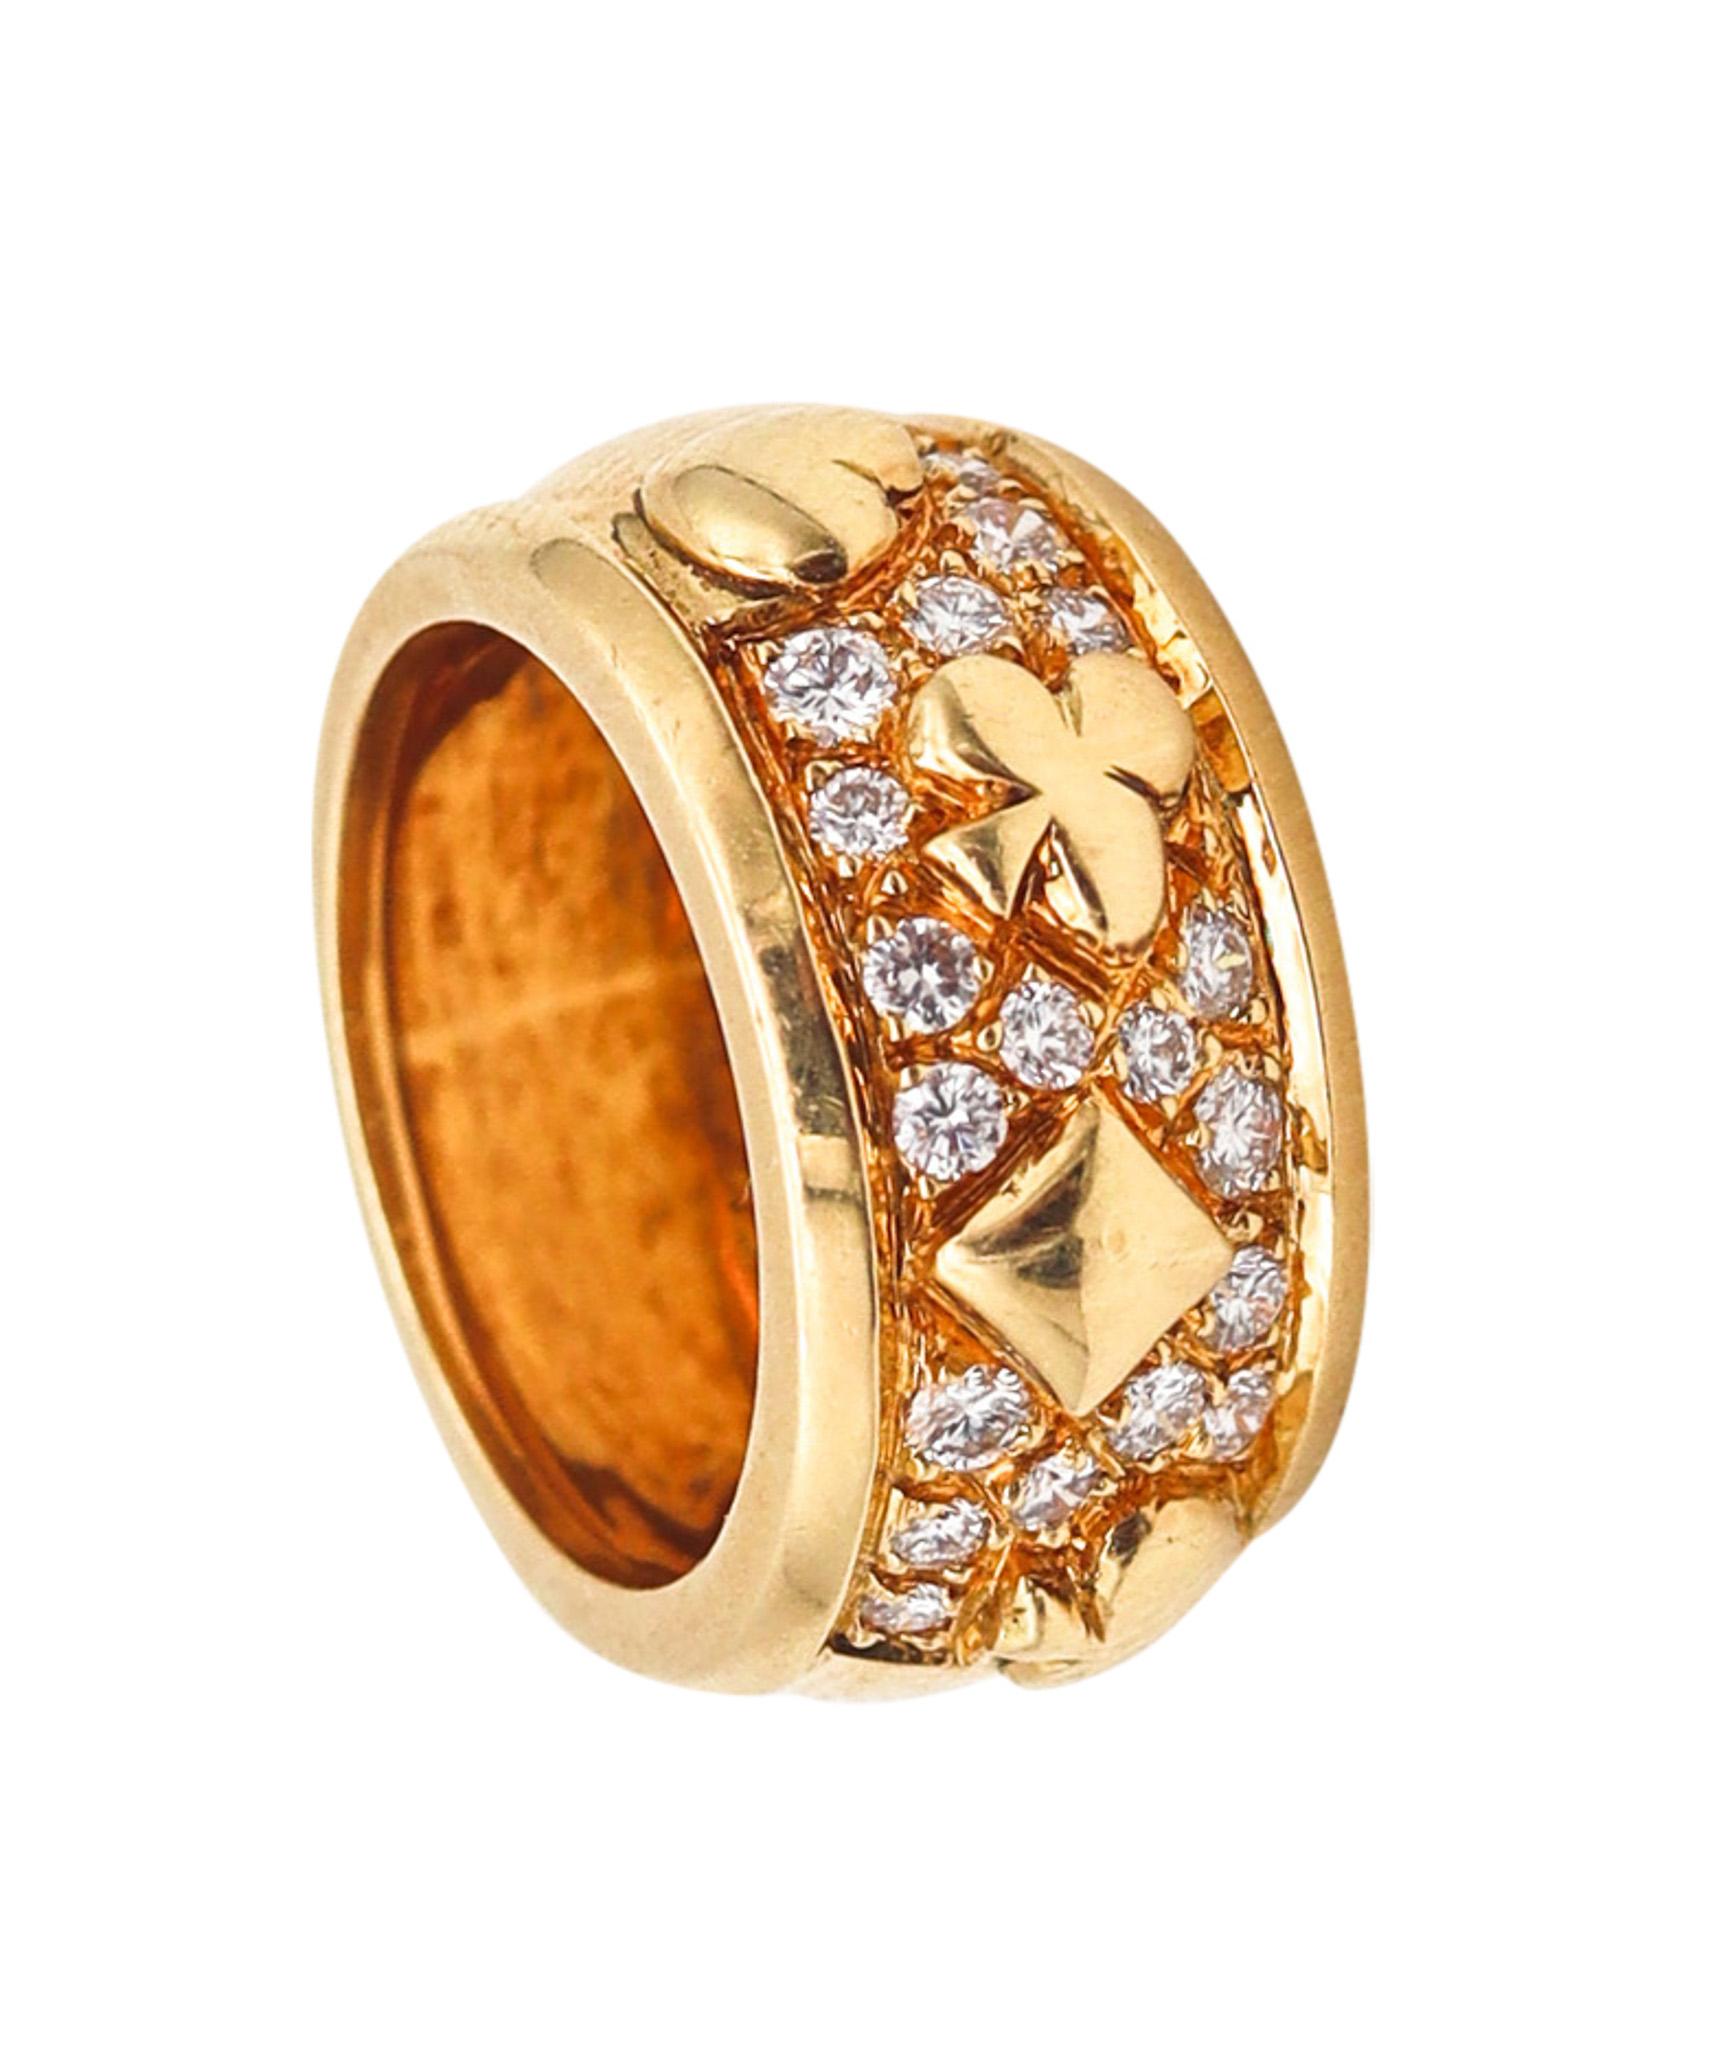 Marchak Paris Casino Motifs Band Ring In 18Kt Yellow Gold With VS Diamonds For Sale